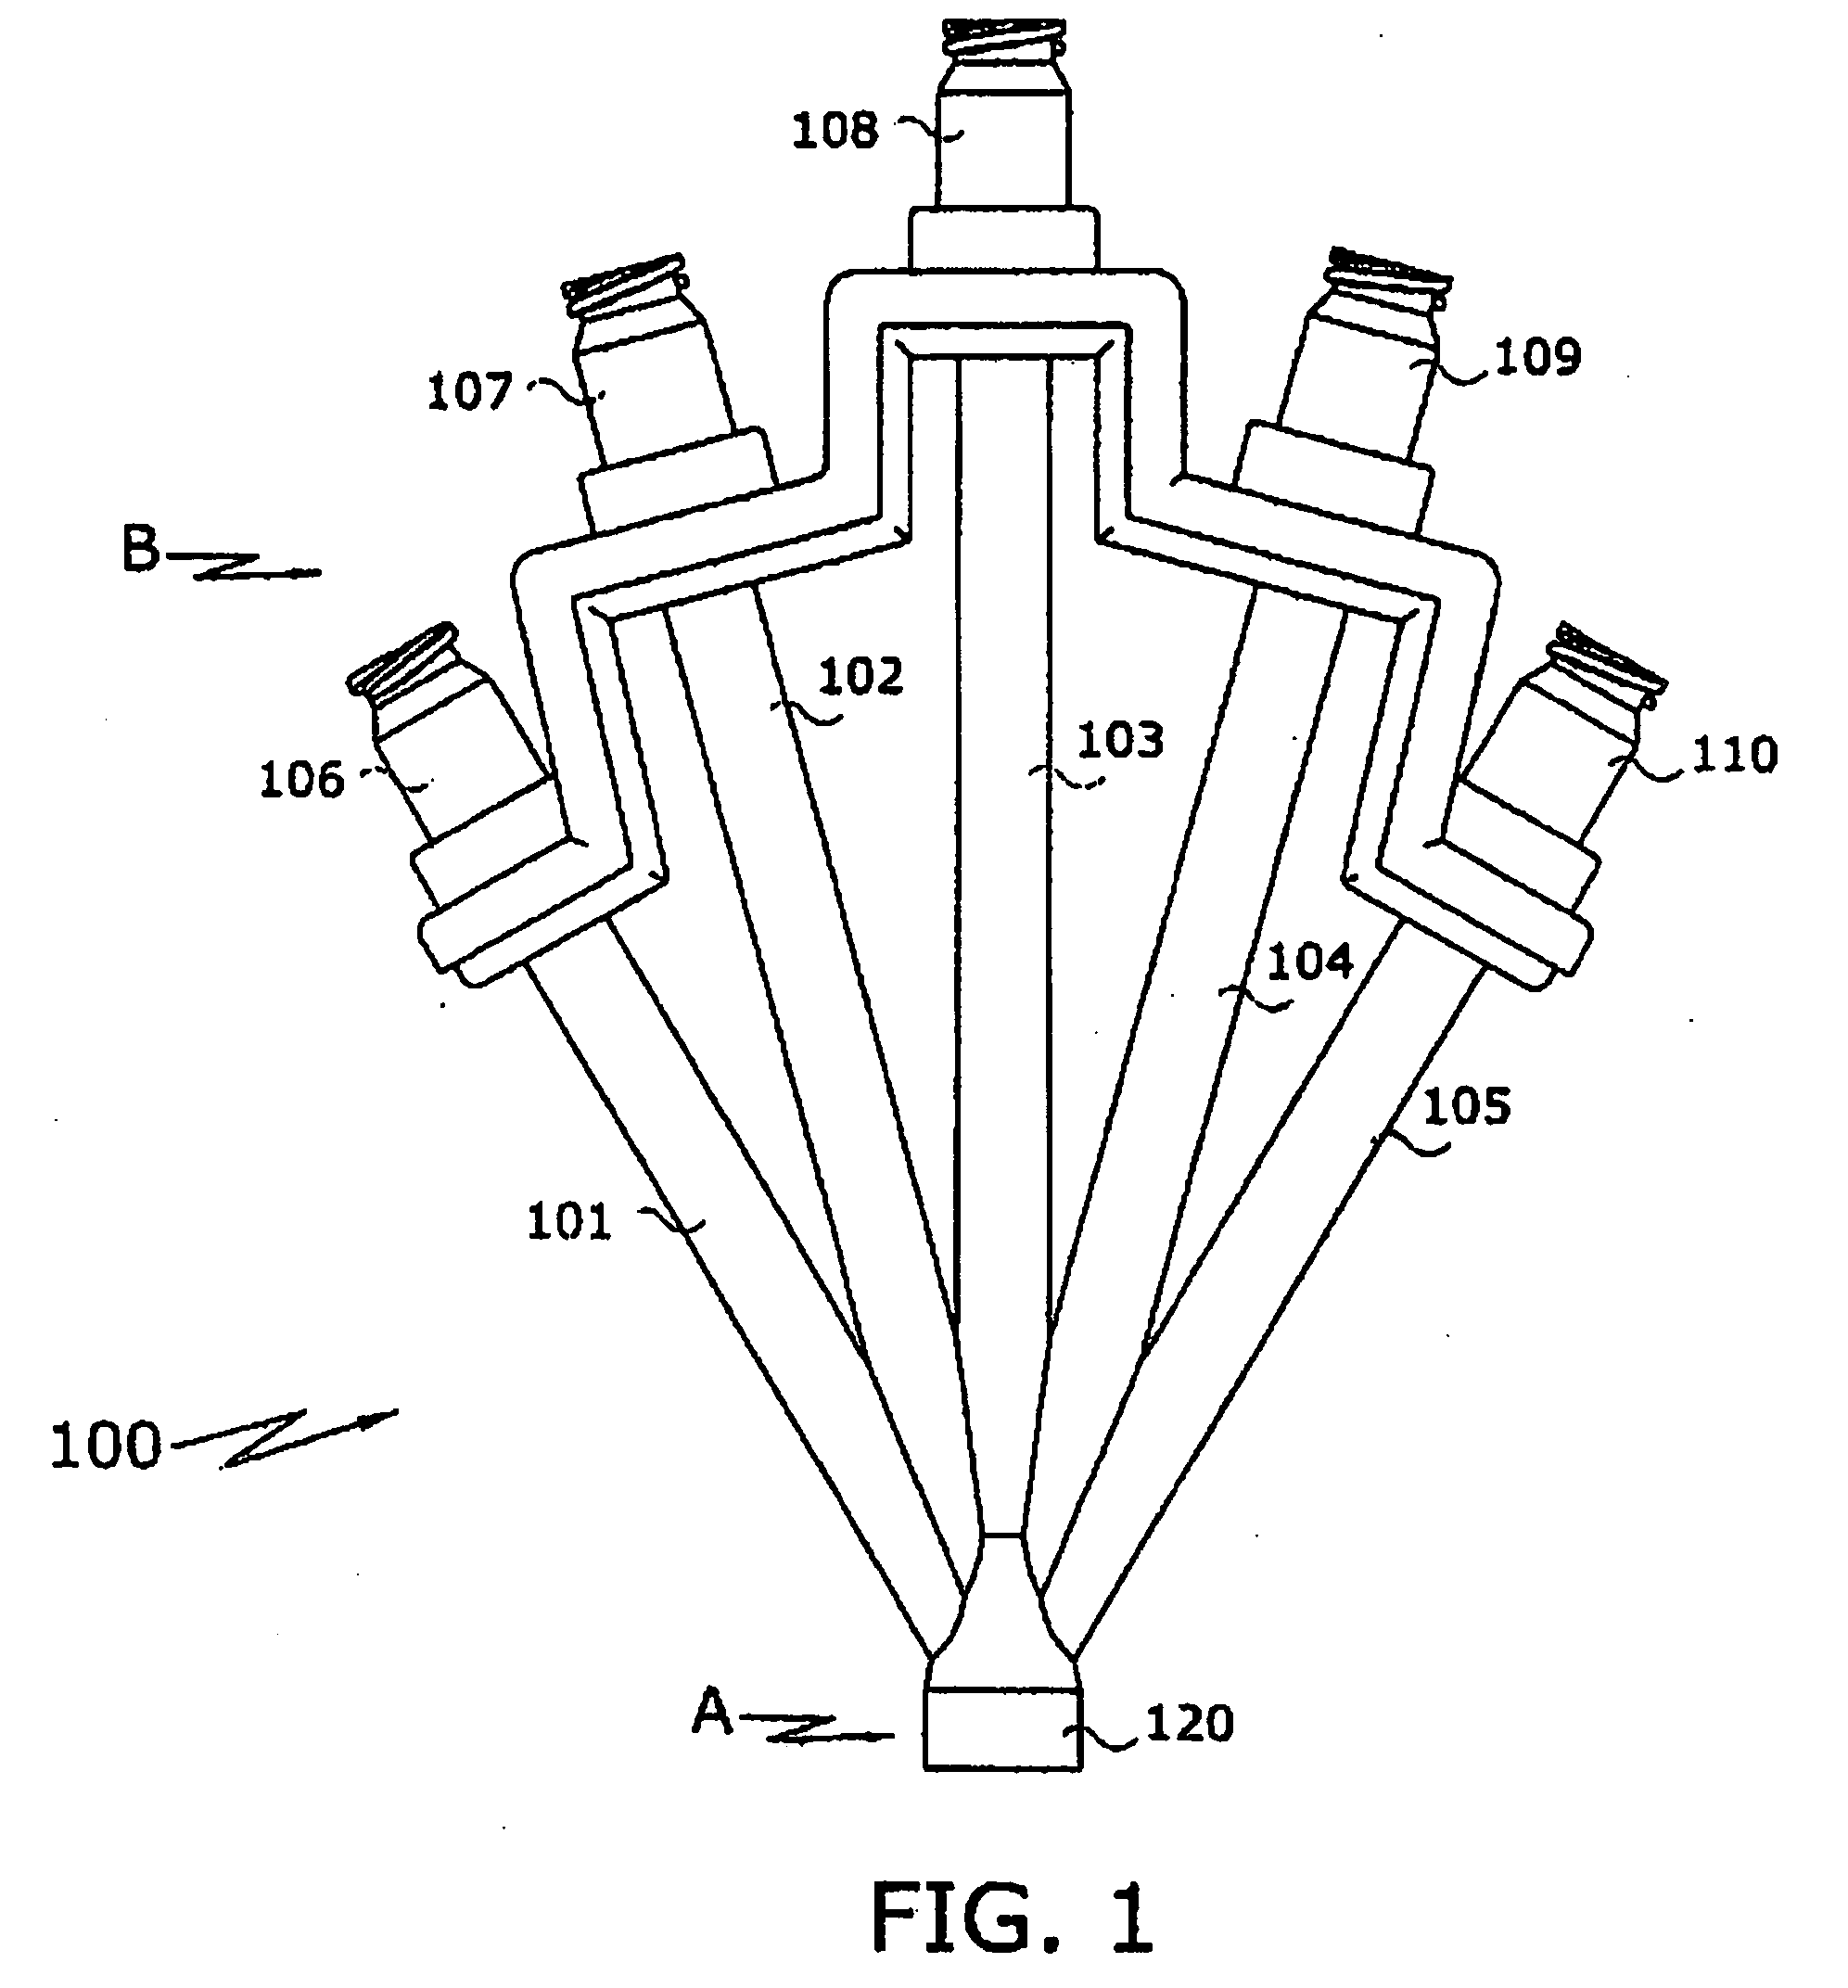 Manifold hub for patient fluid administration